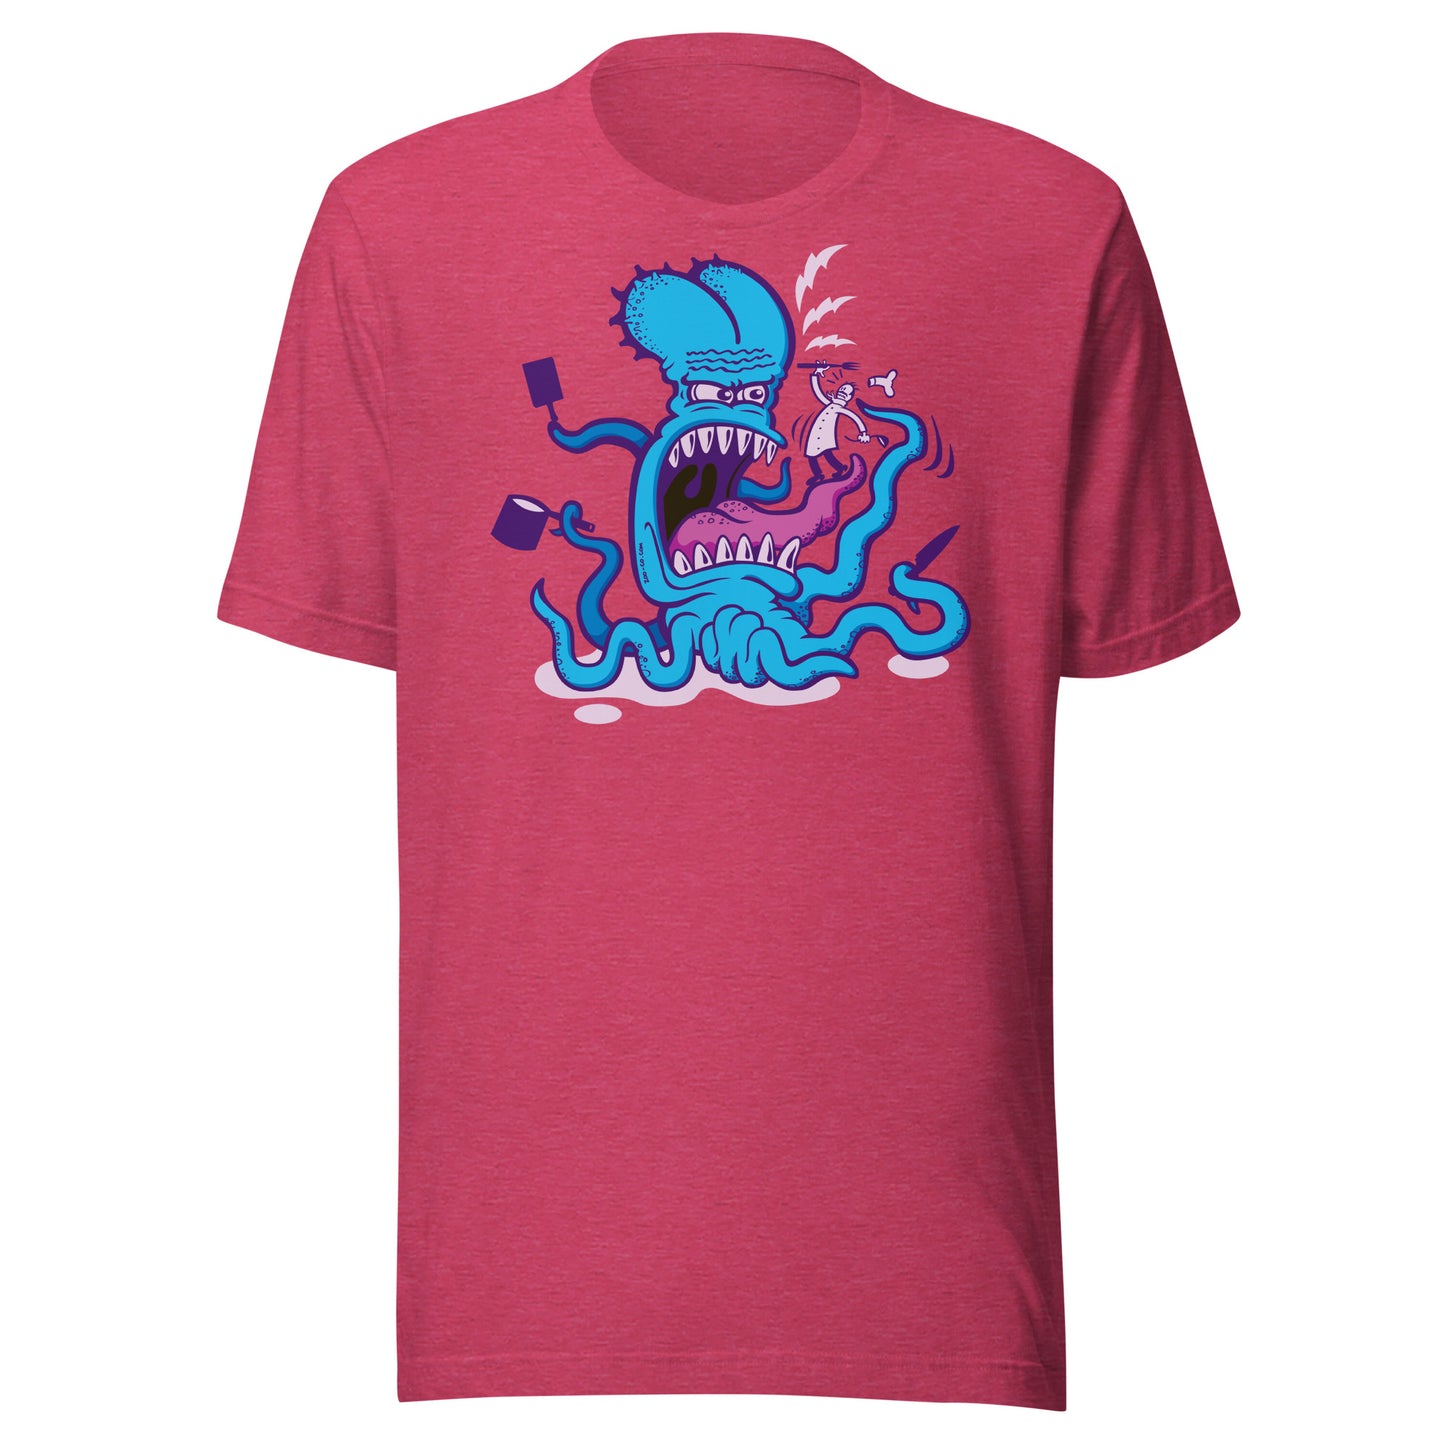 When cooking the perfect octopus recipe becomes extremely dangerous Unisex t-shirt. Raspberry. Front view